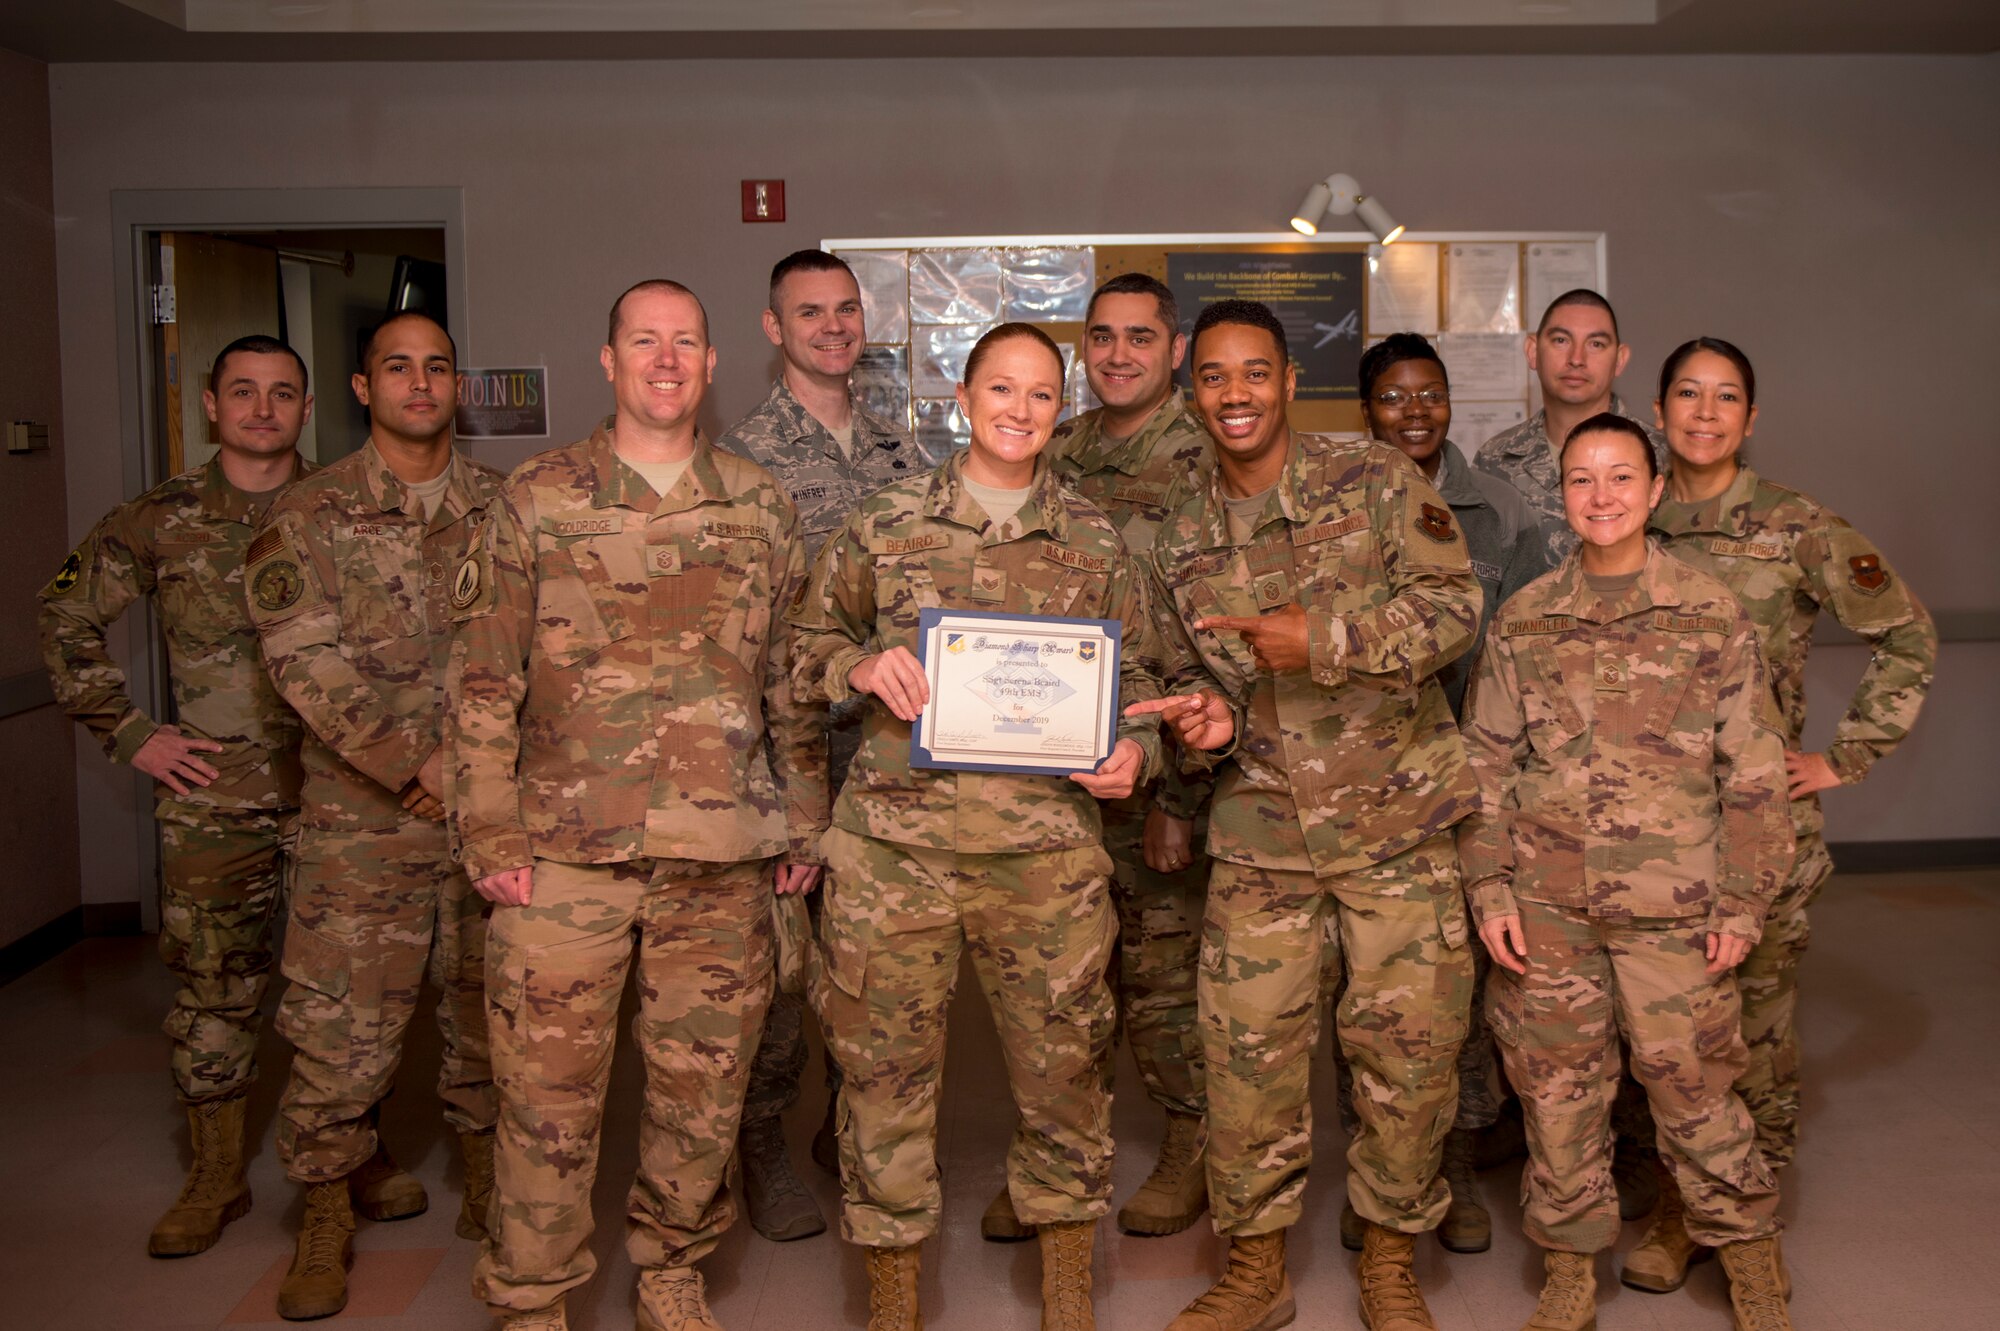 Staff Sgt. Serena Beaird, 49ths EMS unit deployment manager, receives the Diamond Sharp Award from the 49th Wing First Sergeants Council, Jan. 14, 2020. Every month, a first sergeant has the honor of choosing a deserving Airman to be presented the Diamond Sharp Award for an outstanding act or continuous outstanding performance. (U.S. Air Force photo by Airman 1st Class Kristin Weathersby)